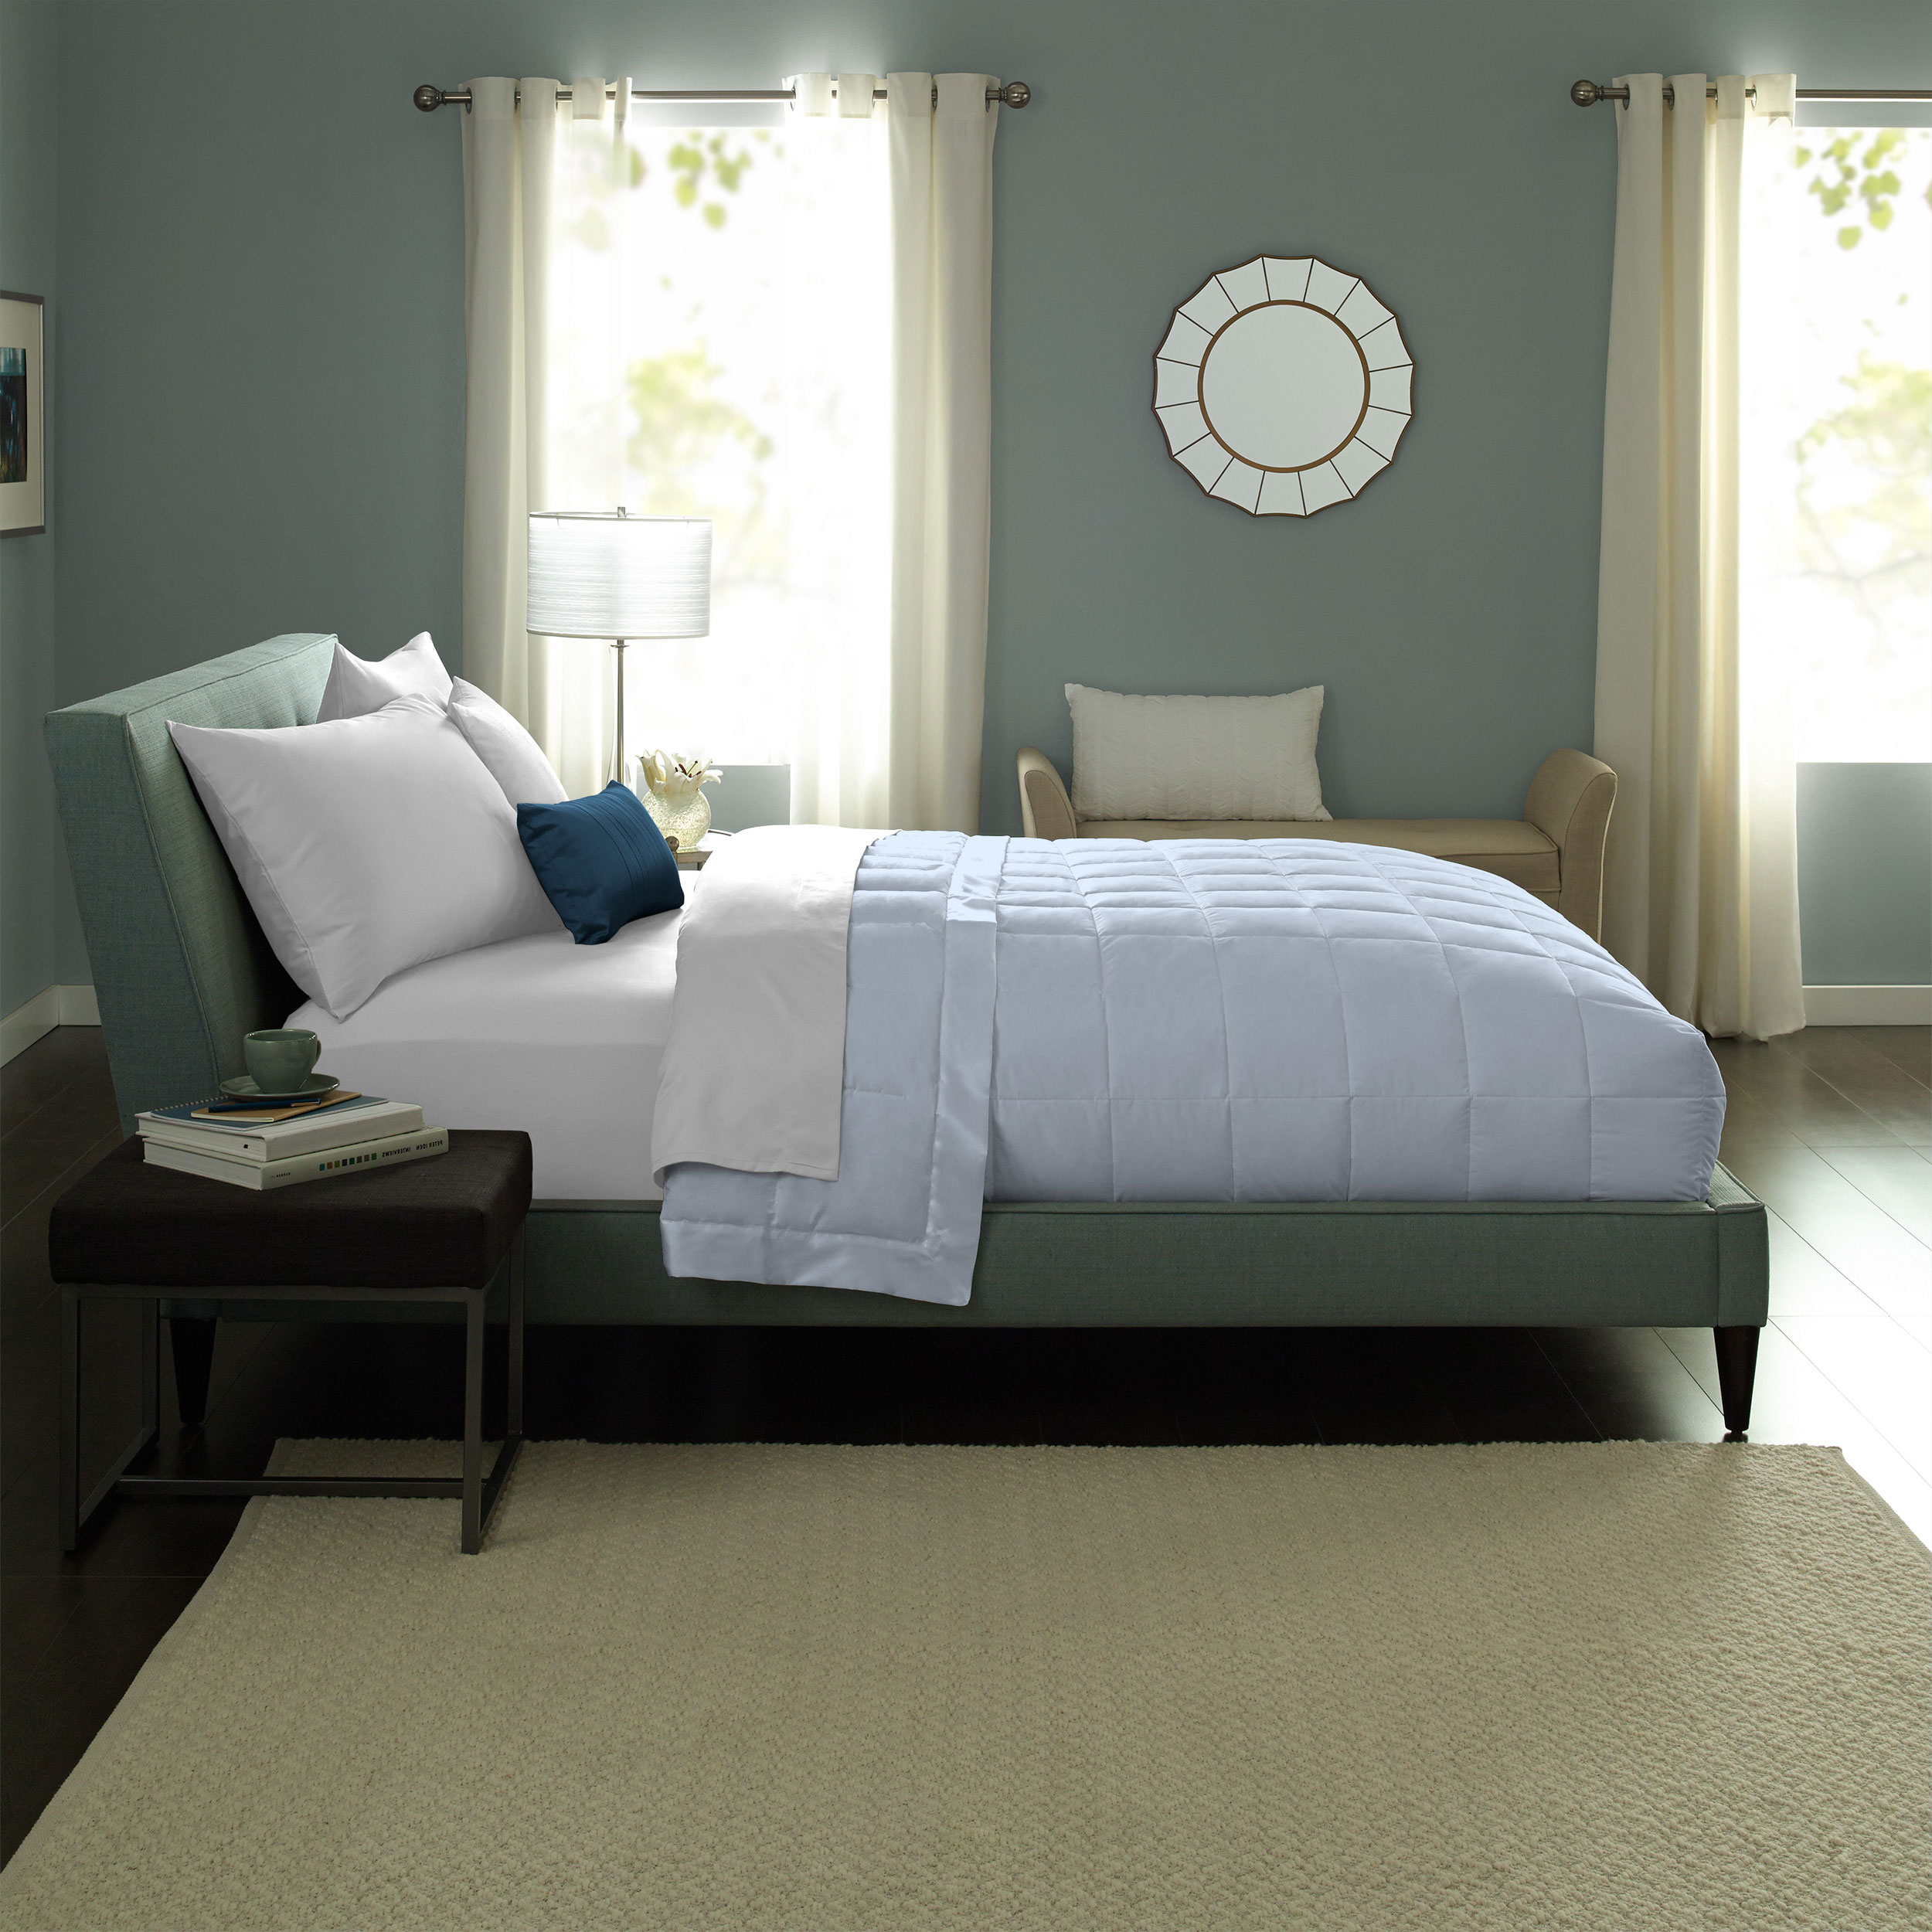 Pacific Coast Cream Down Blanket 230 Thread Count Resilia Feathers 550 Fill Power Down - Full/queen